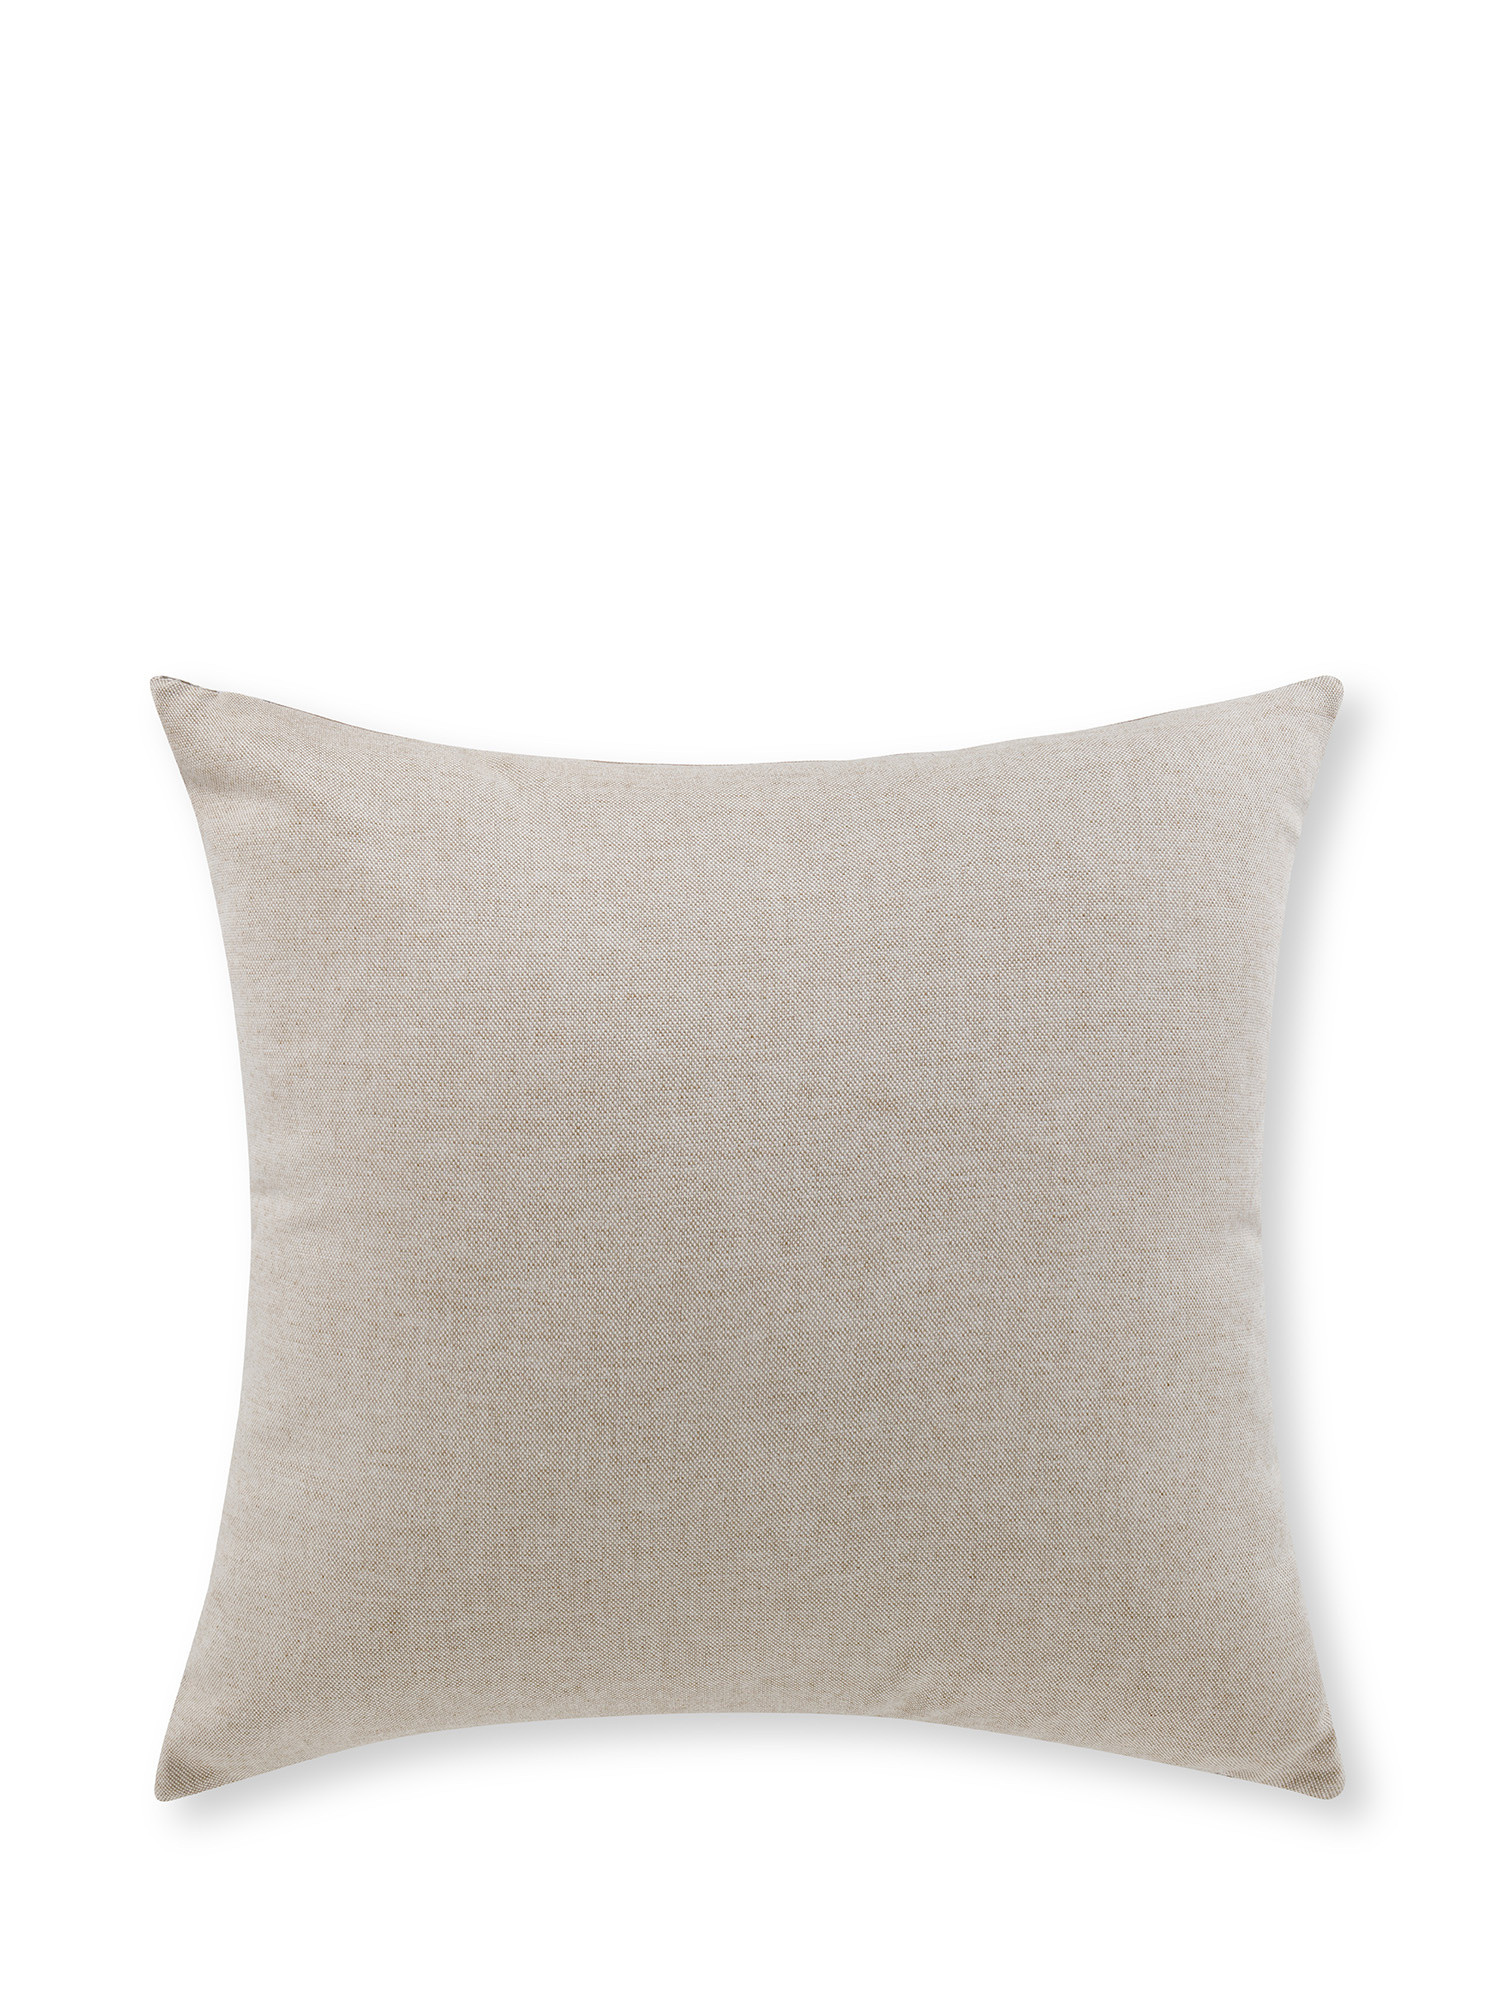 Cushion in jacquard fabric with silver relief pattern 45x45 cm, Silver Grey, large image number 1